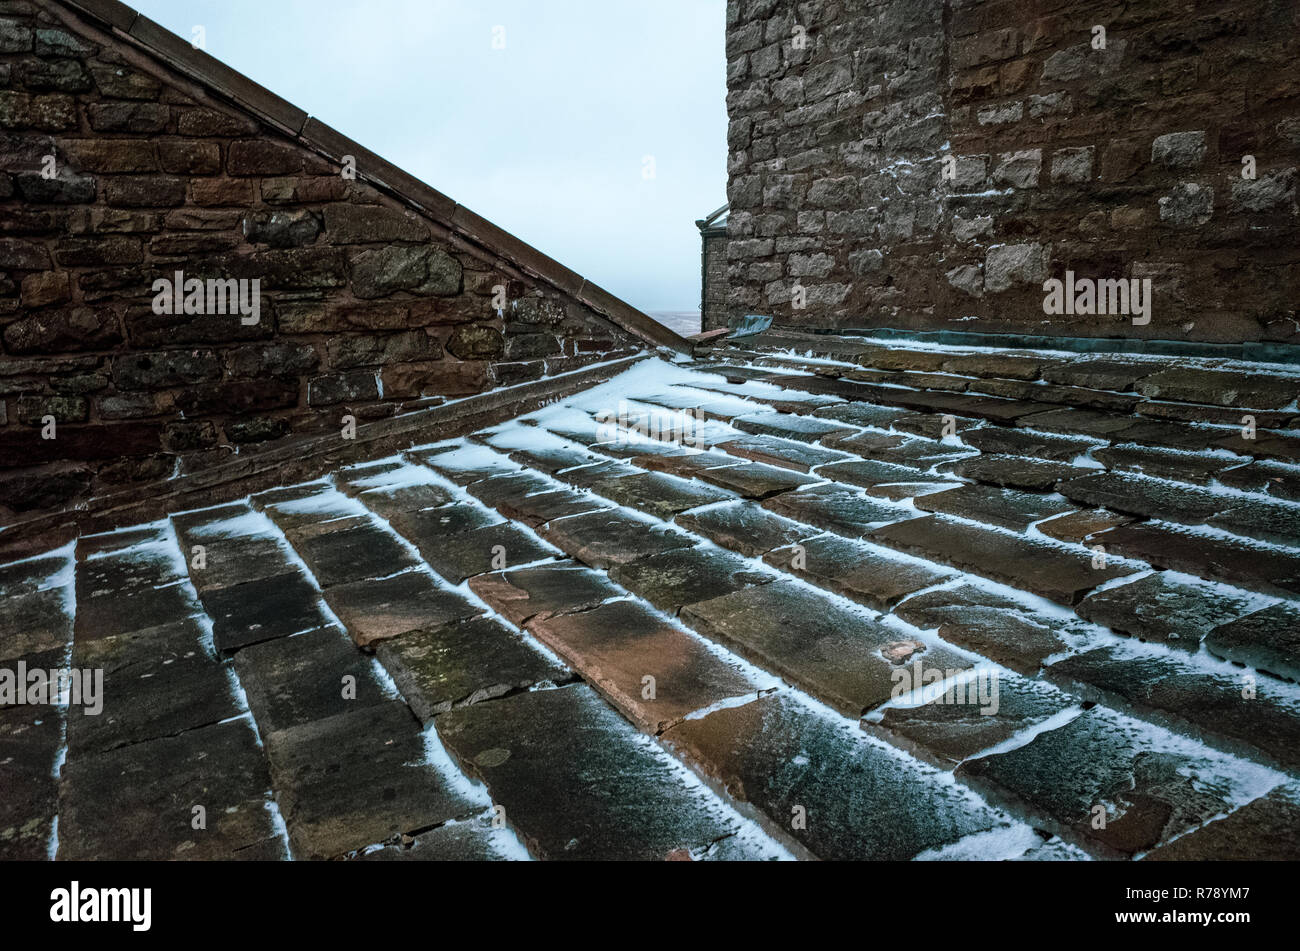 Snow on a tiled roof, Yorkshire Dales Stock Photo